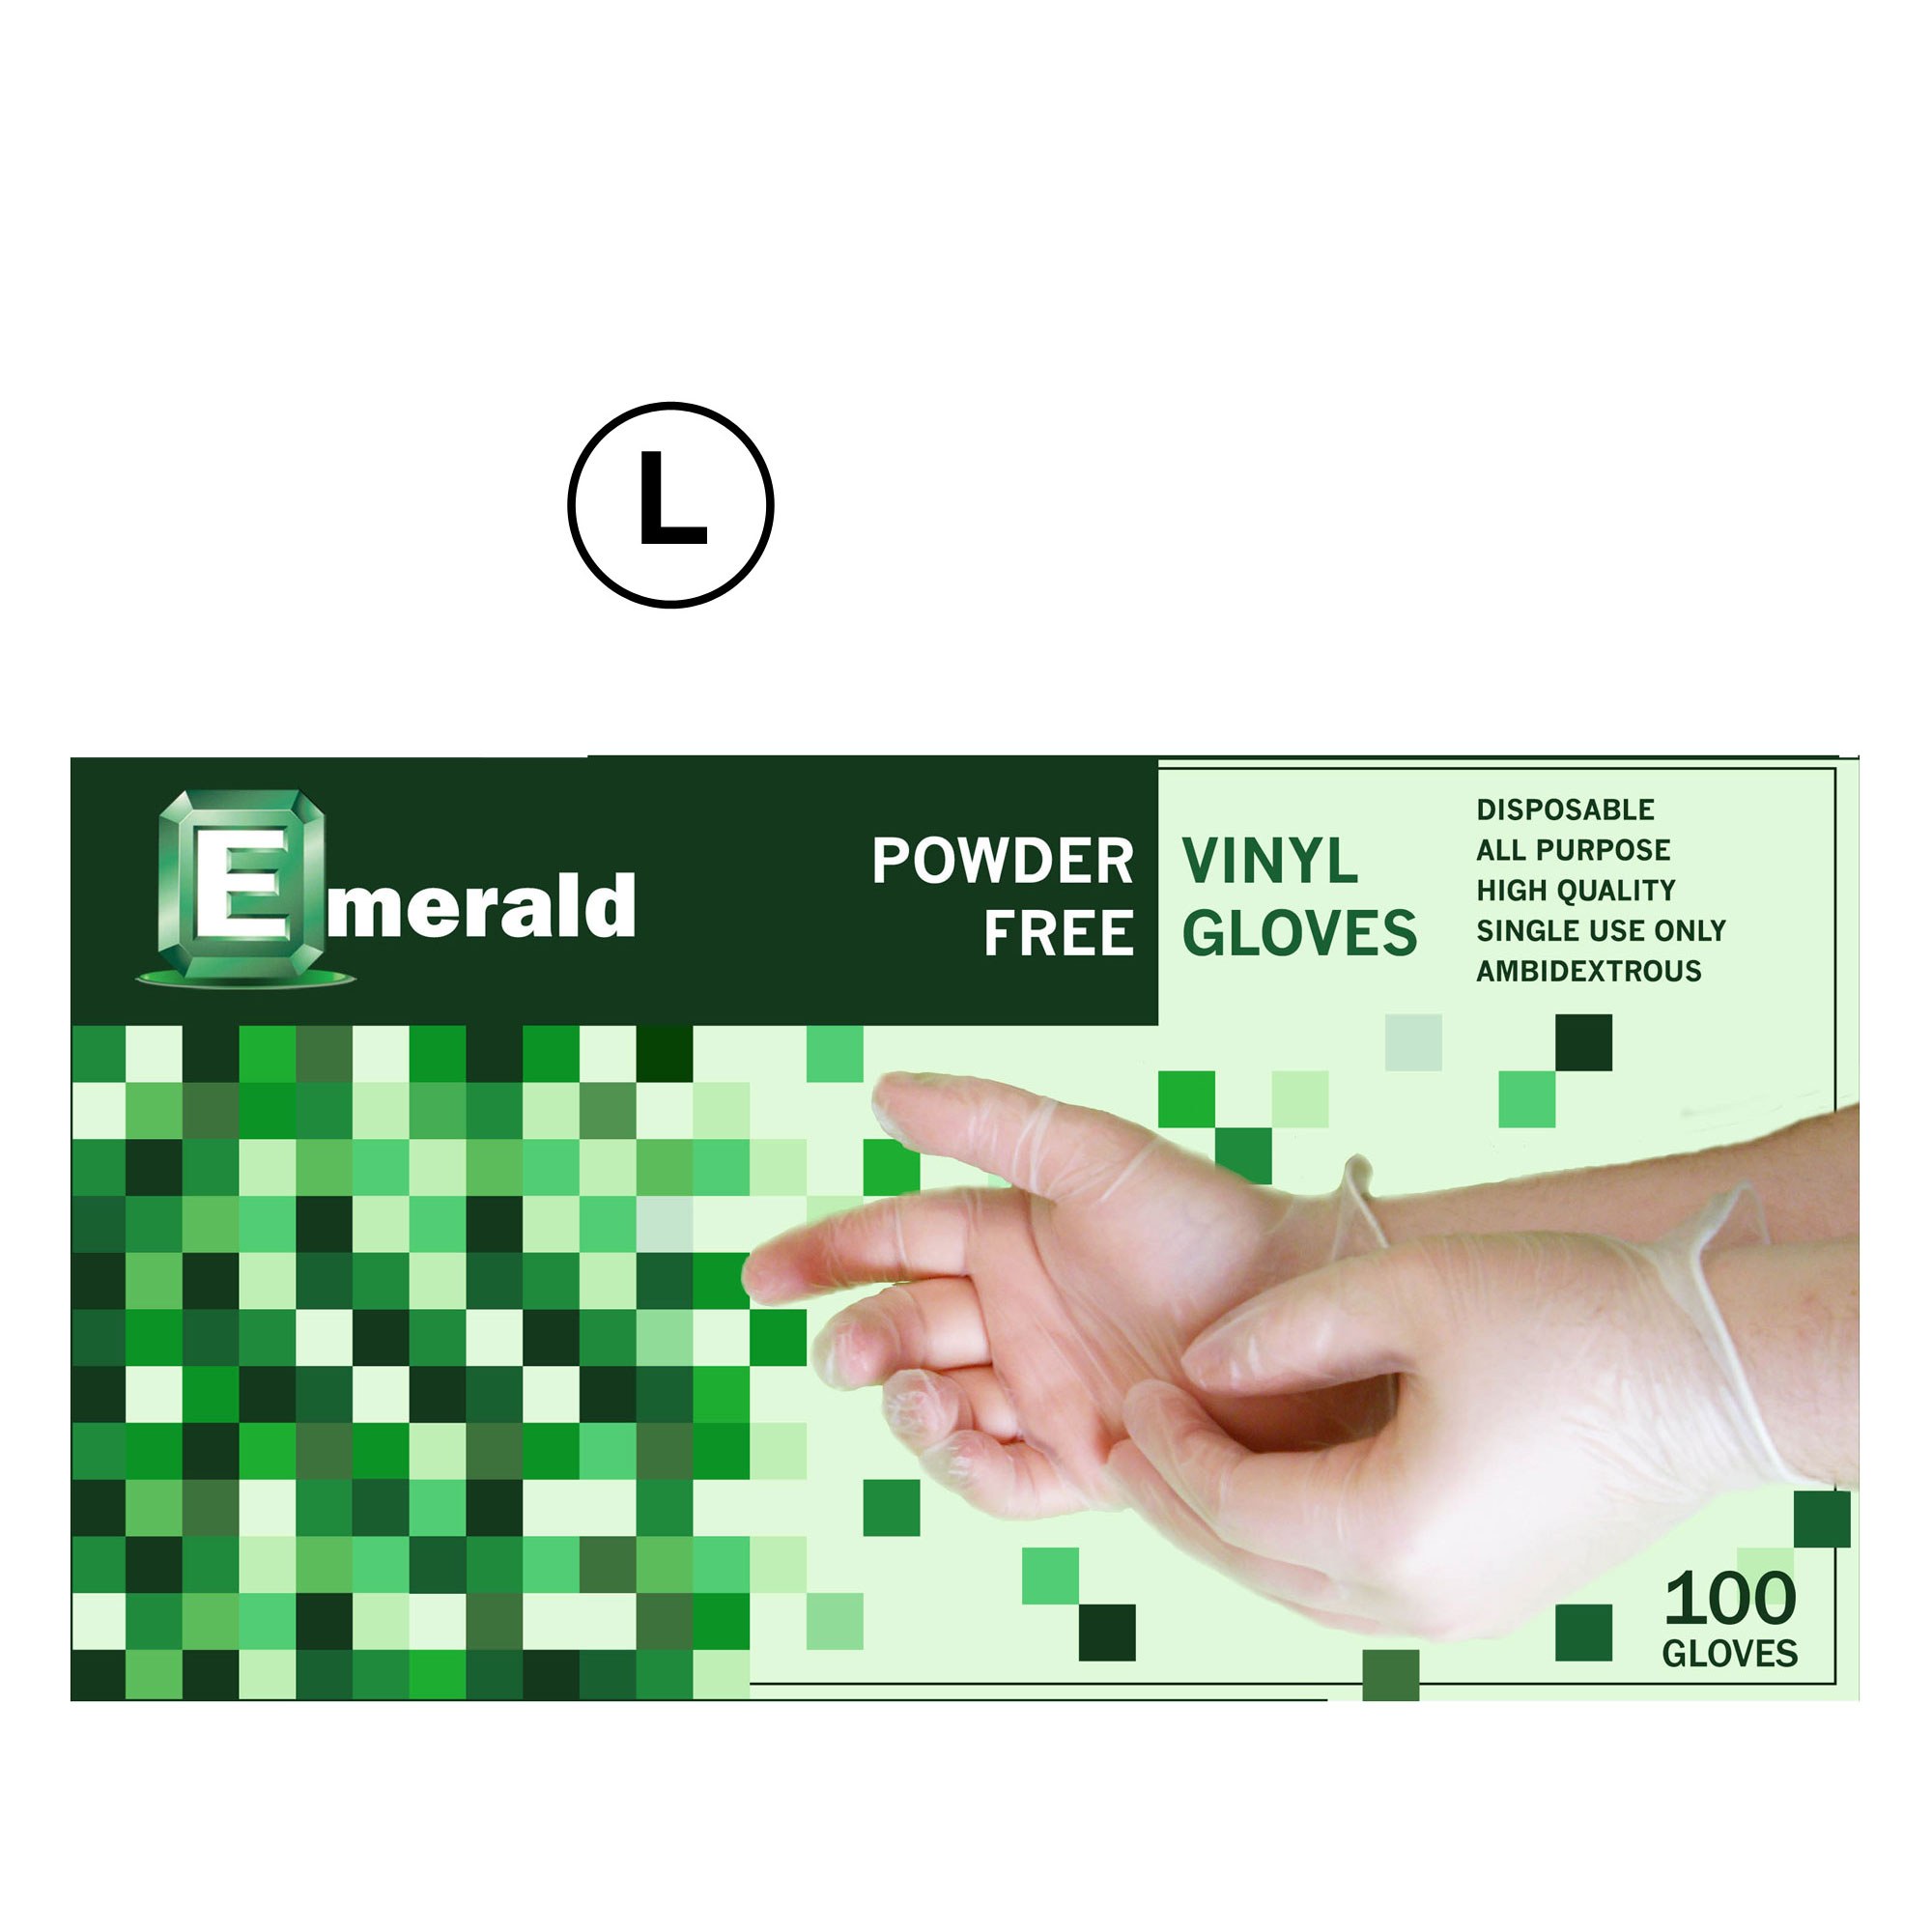 Emerald Shannon Powder Free Vinyl Gloves - 100 count - Large